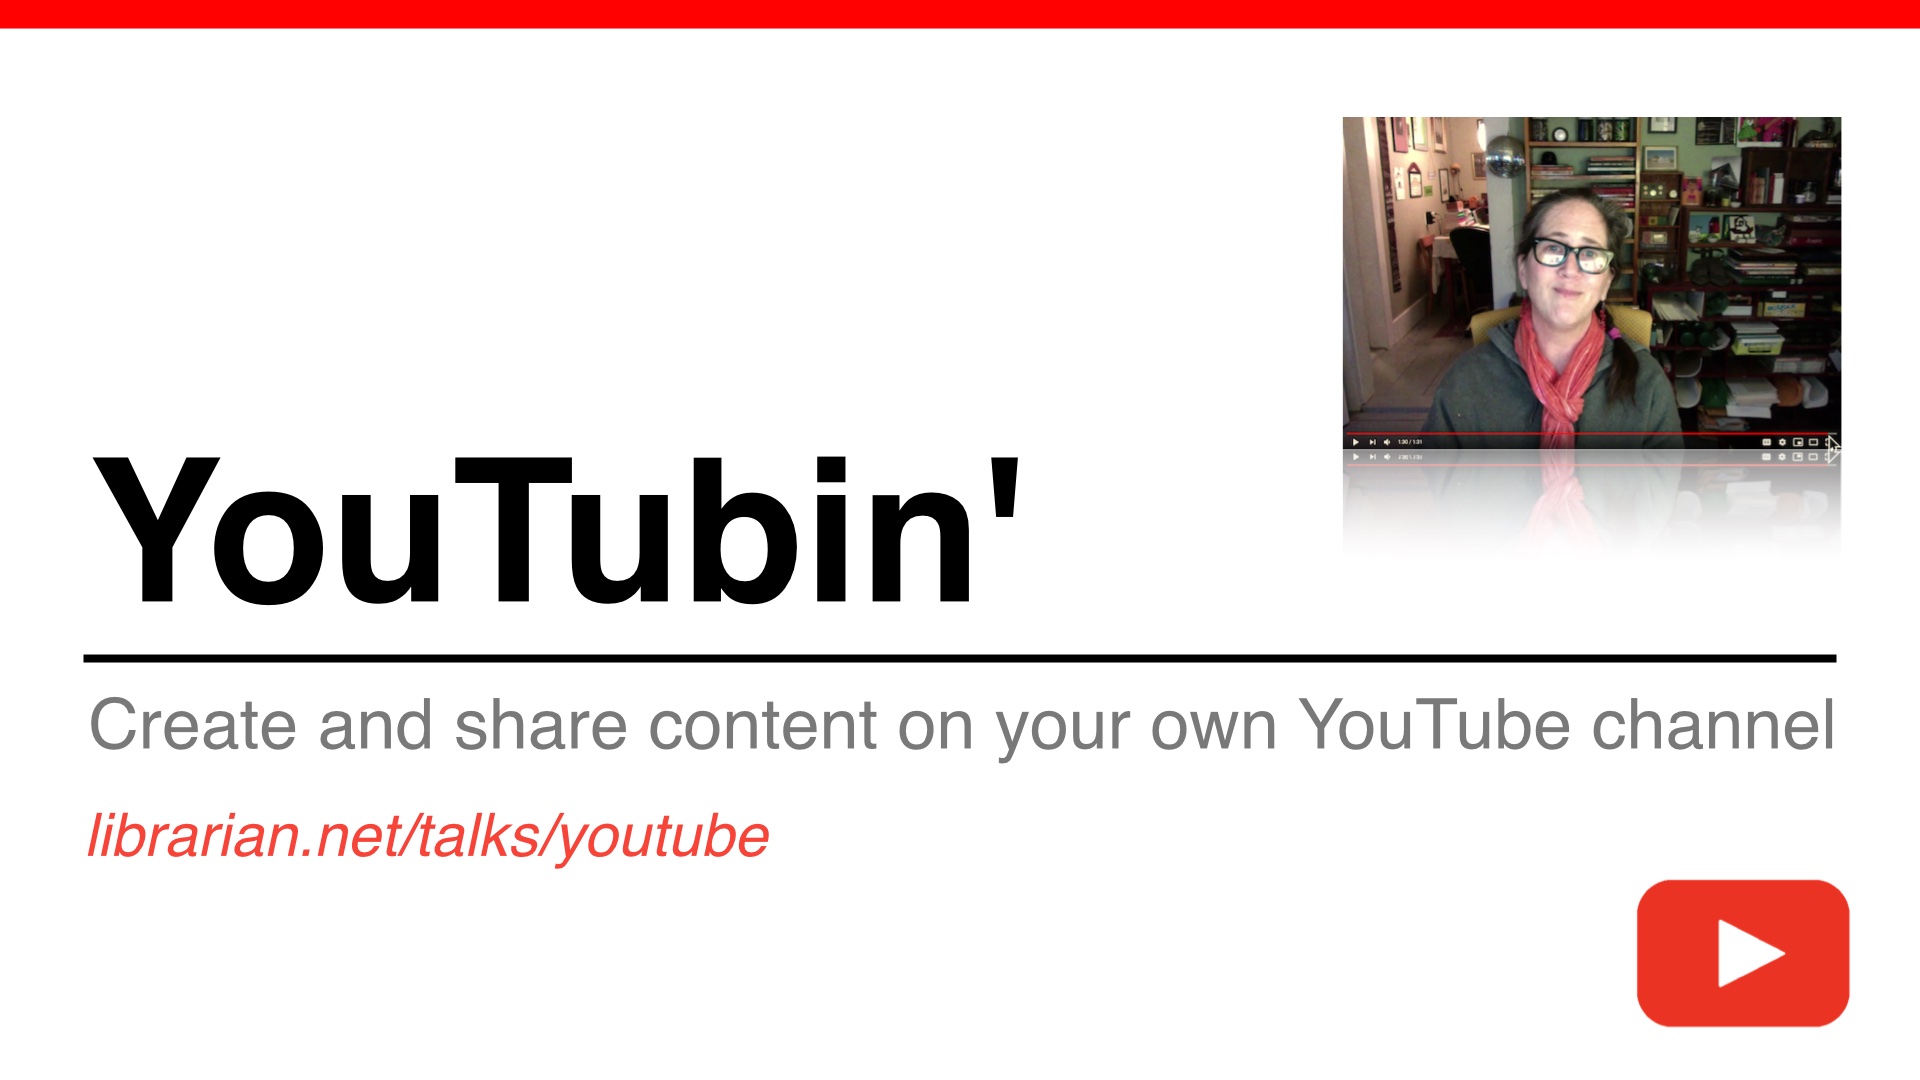 Title slide: You Tubin, create and share content on your own YouTube channel, the URL for the talk and a YouTube color scheme. Image of me in a YouTube video frame